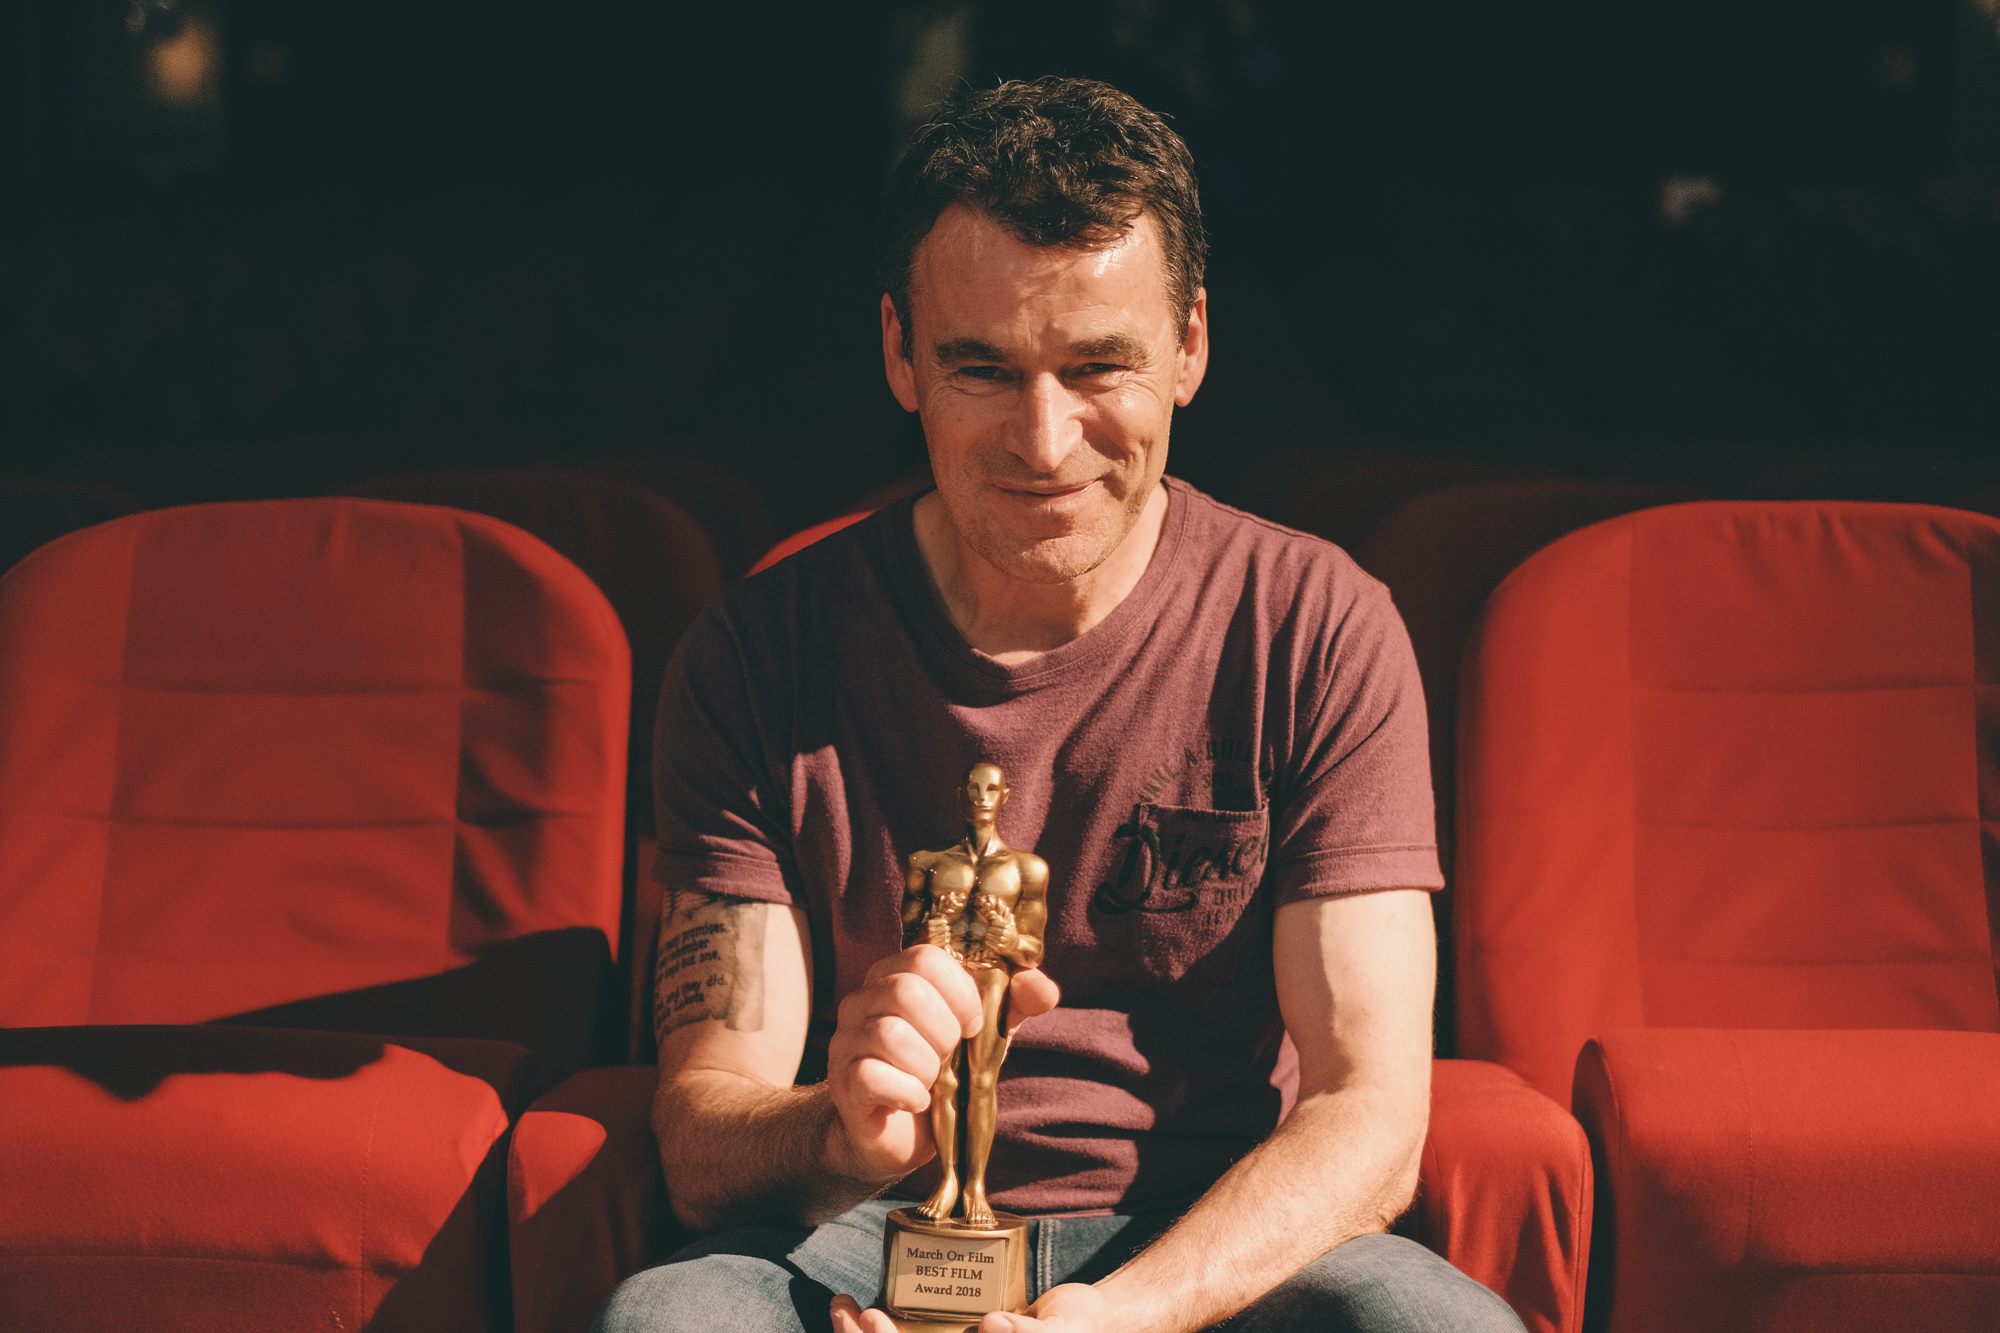 Chris McMorrow...Writer and director of 'The Homecoming' with the award for Best Film